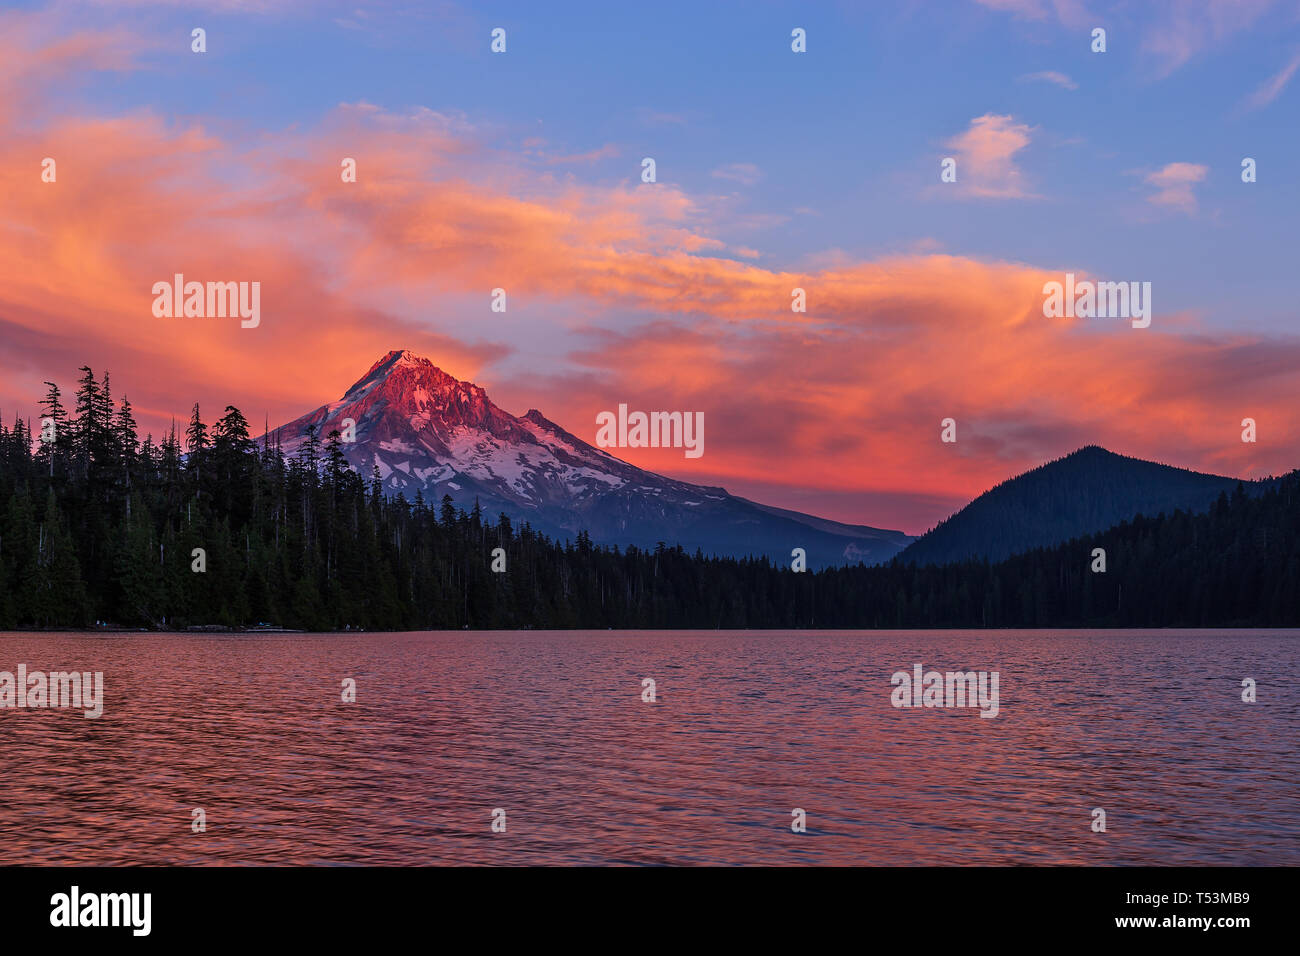 Scenic landscape with Mt. Hood at sunset from Lost Lake, Oregon, USA Stock Photo